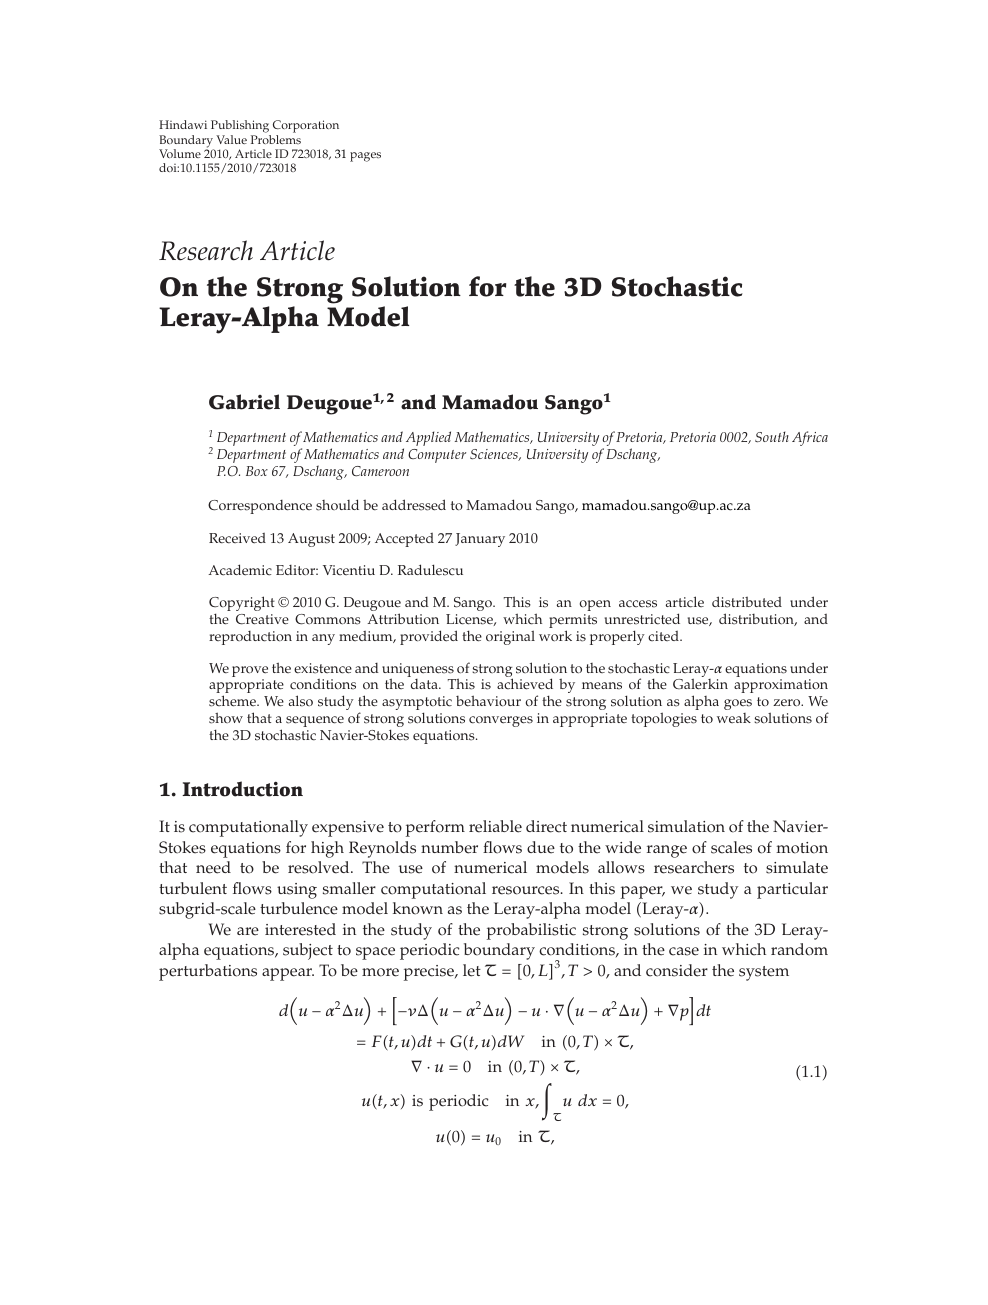 On The Strong Solution For The 3d Stochastic Leray Alpha Model Topic Of Research Paper In Mathematics Download Scholarly Article Pdf And Read For Free On Cyberleninka Open Science Hub